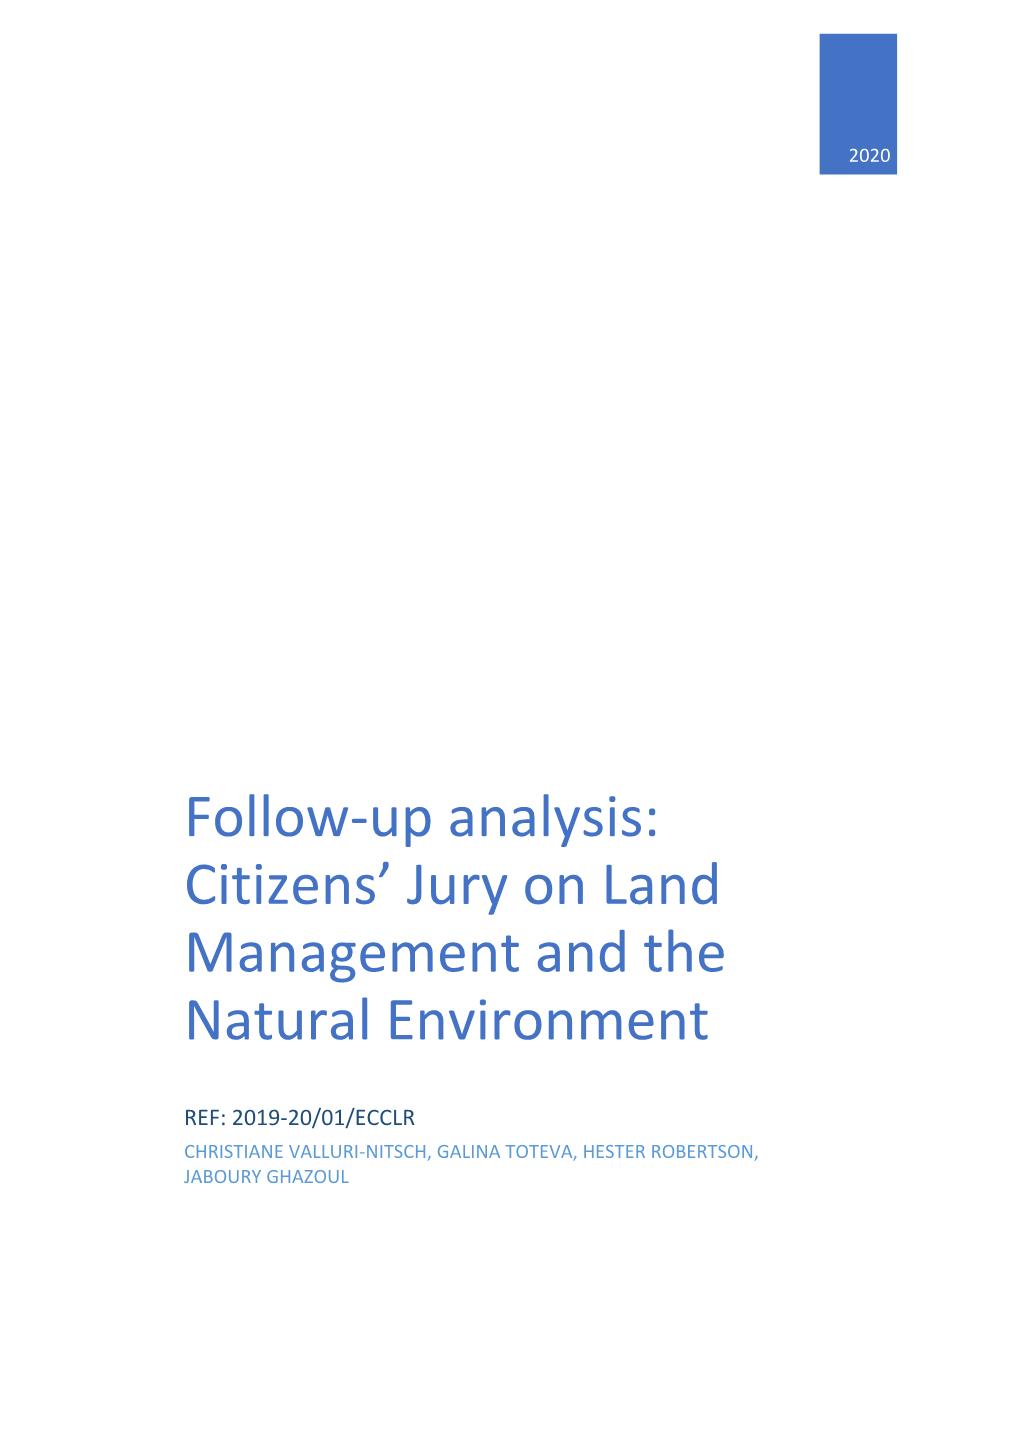 Follow-Up Analysis: Citizens' Jury on Land Management and the Natural